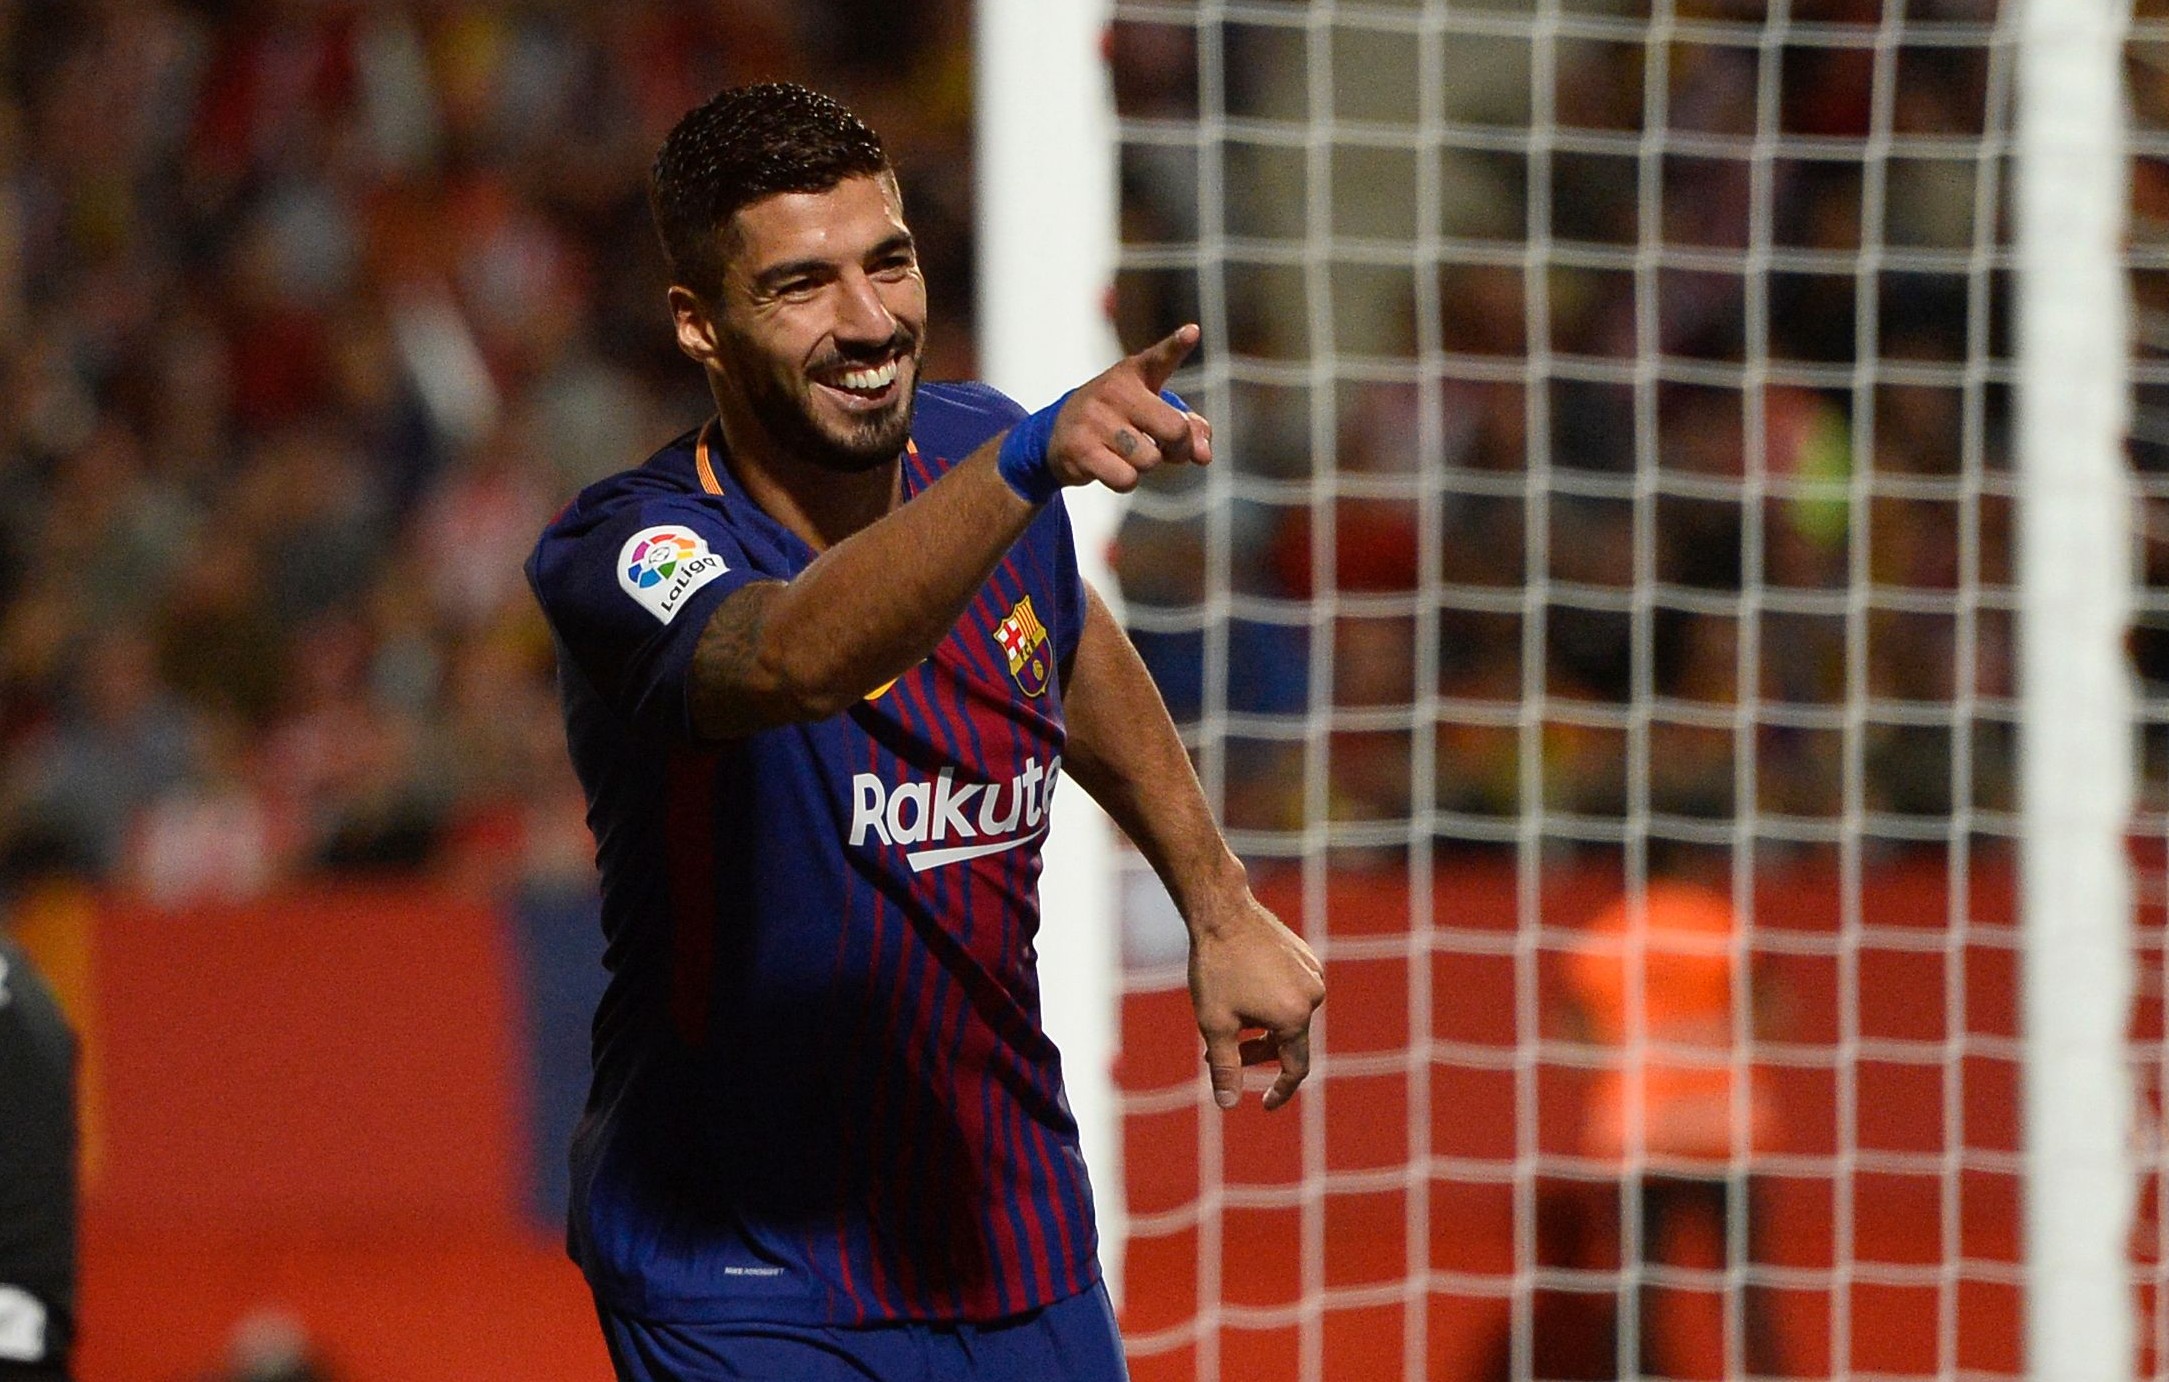 Barcelona's forward from Uruguay Luis Suarez celebrates after scoring during the Spanish league football match Girona FC vs FC Barcelona at the Montilivi stadium in Girona on September 23, 2017. / AFP PHOTO / Josep LAGO        (Photo credit should read JOSEP LAGO/AFP/Getty Images)